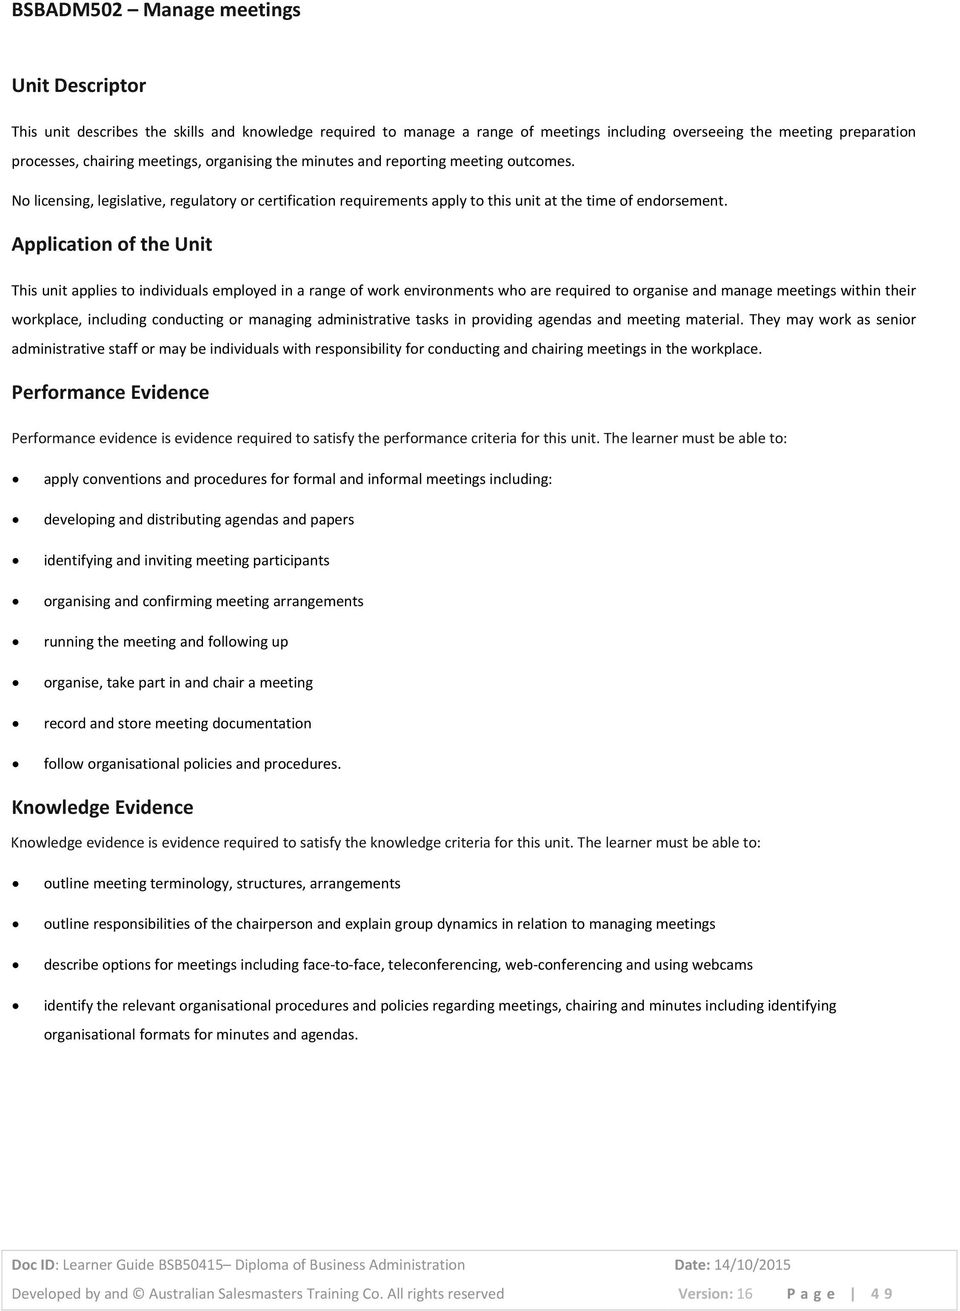 Application of the Unit This unit applies to individuals employed in a range of work environments who are required to organise and manage meetings within their workplace, including conducting or